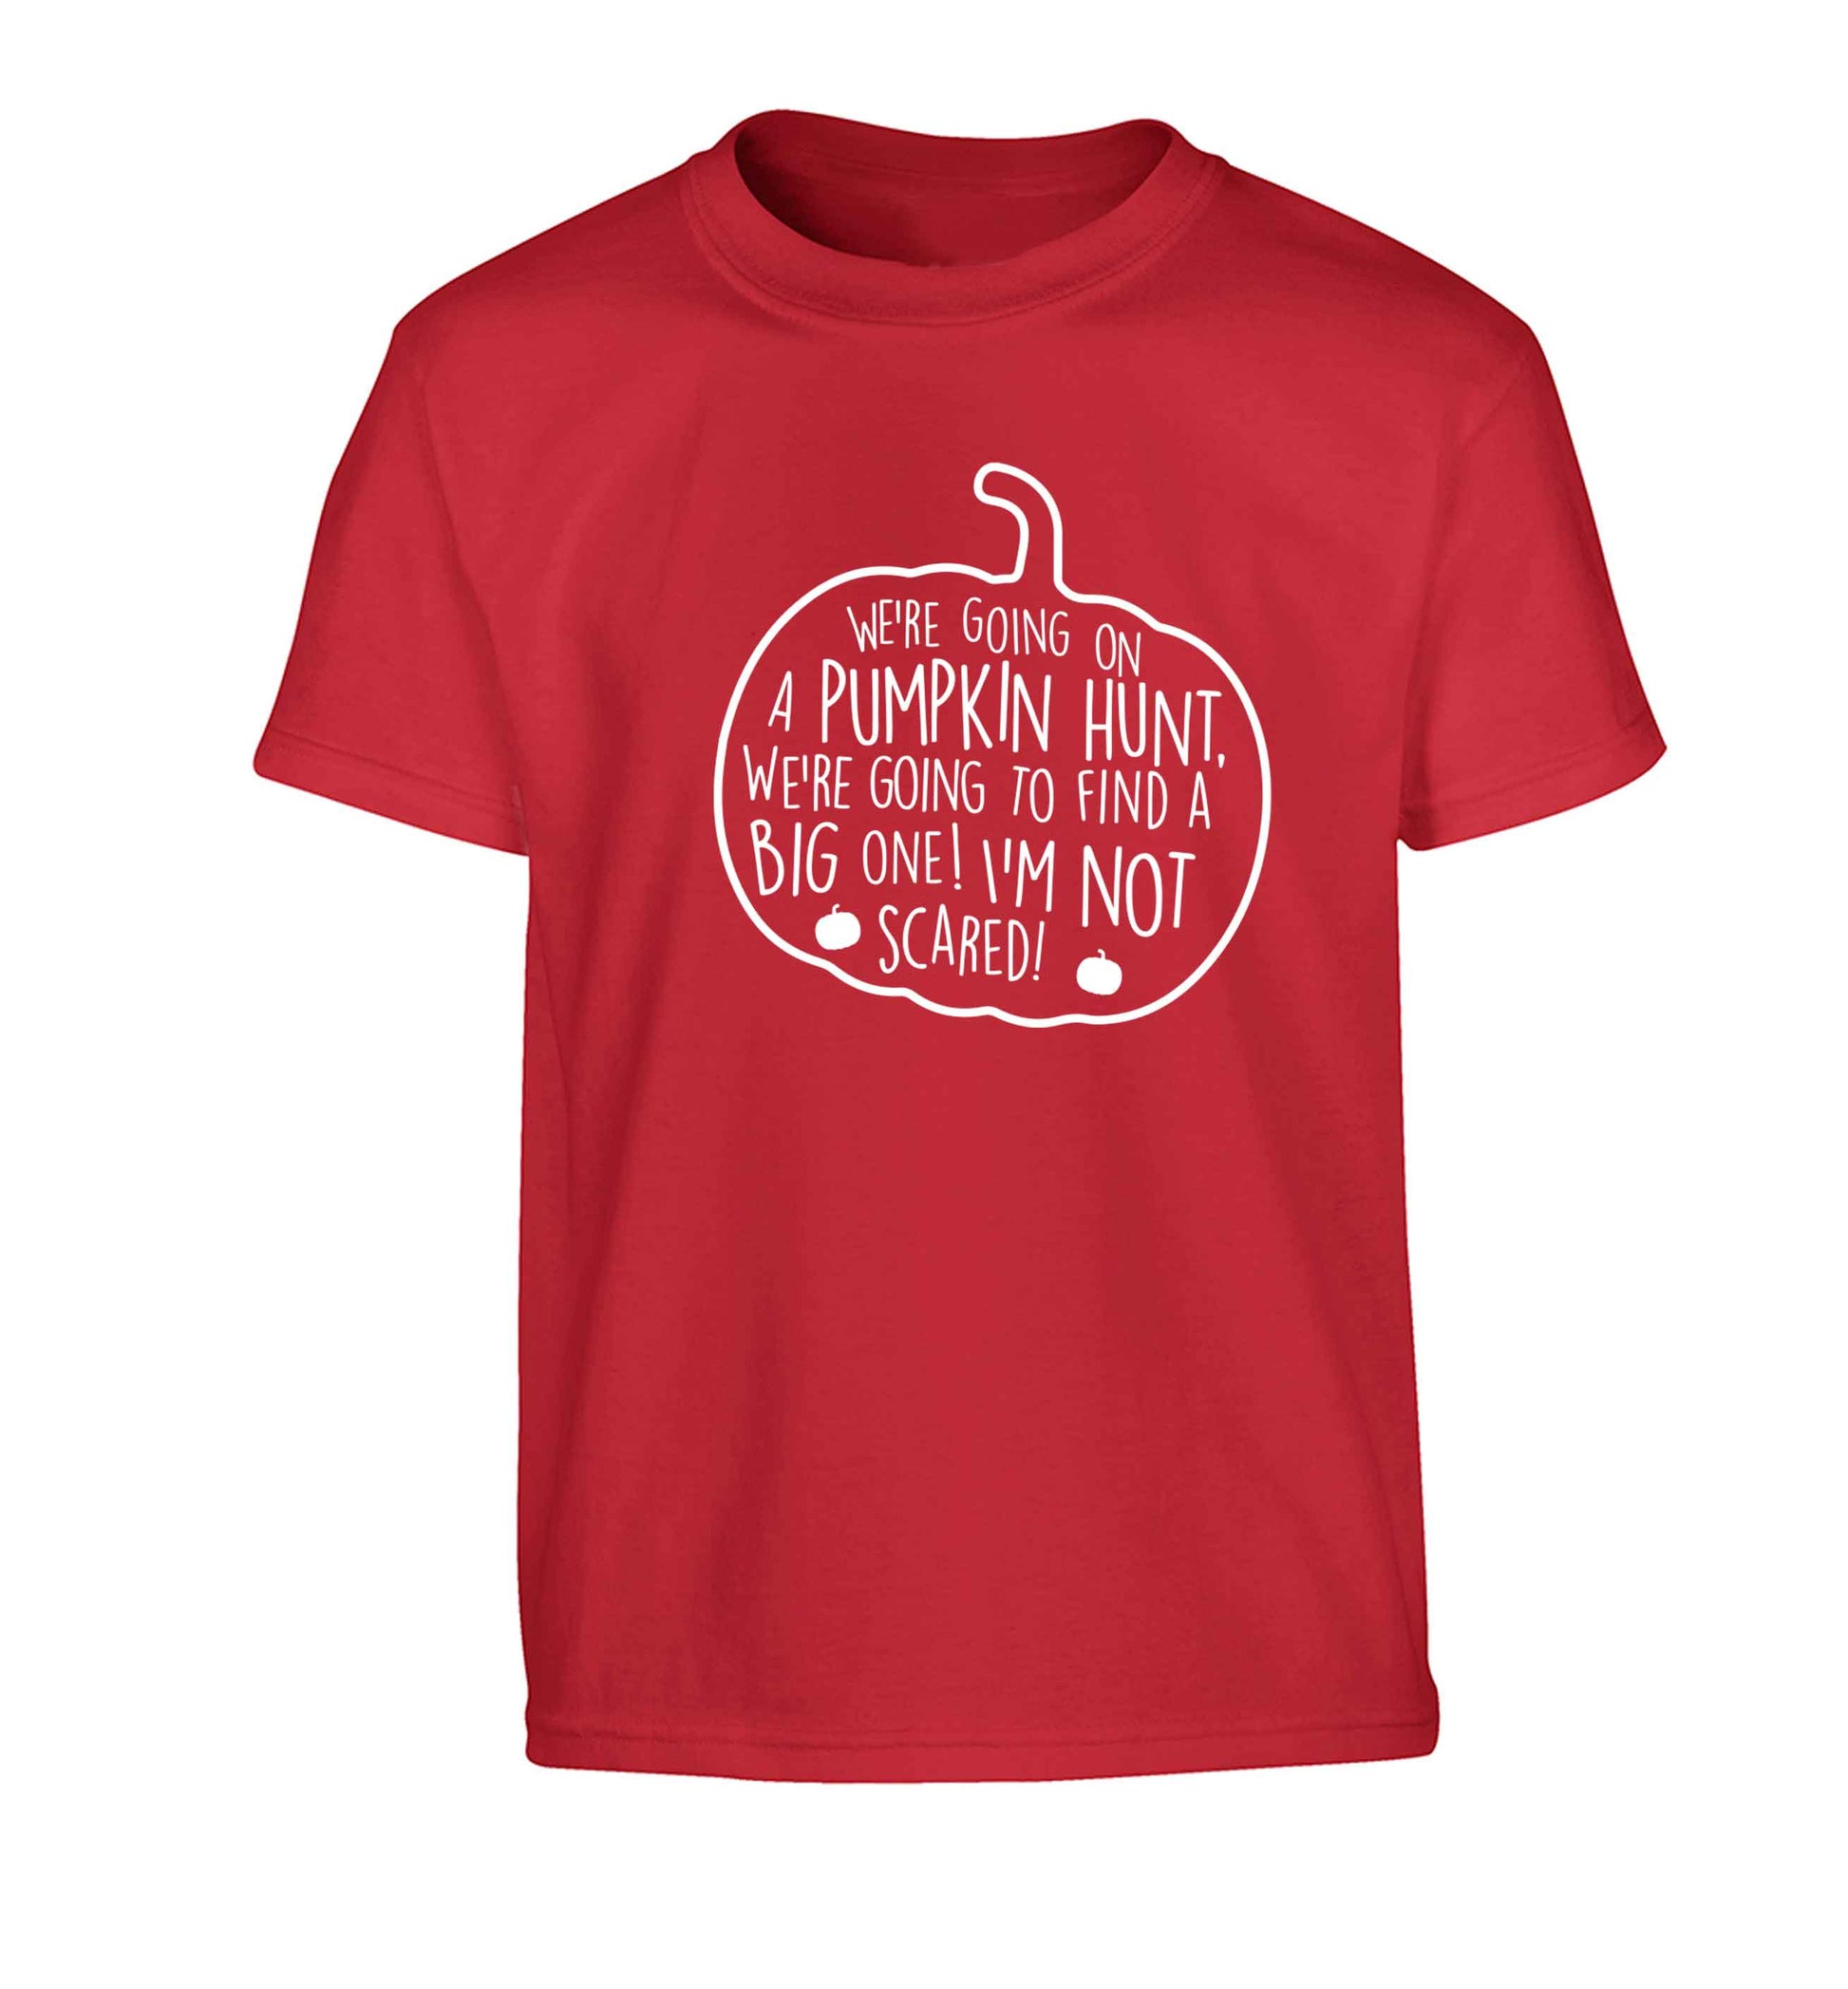 We're going on a pumpkin hunt Children's red Tshirt 12-13 Years